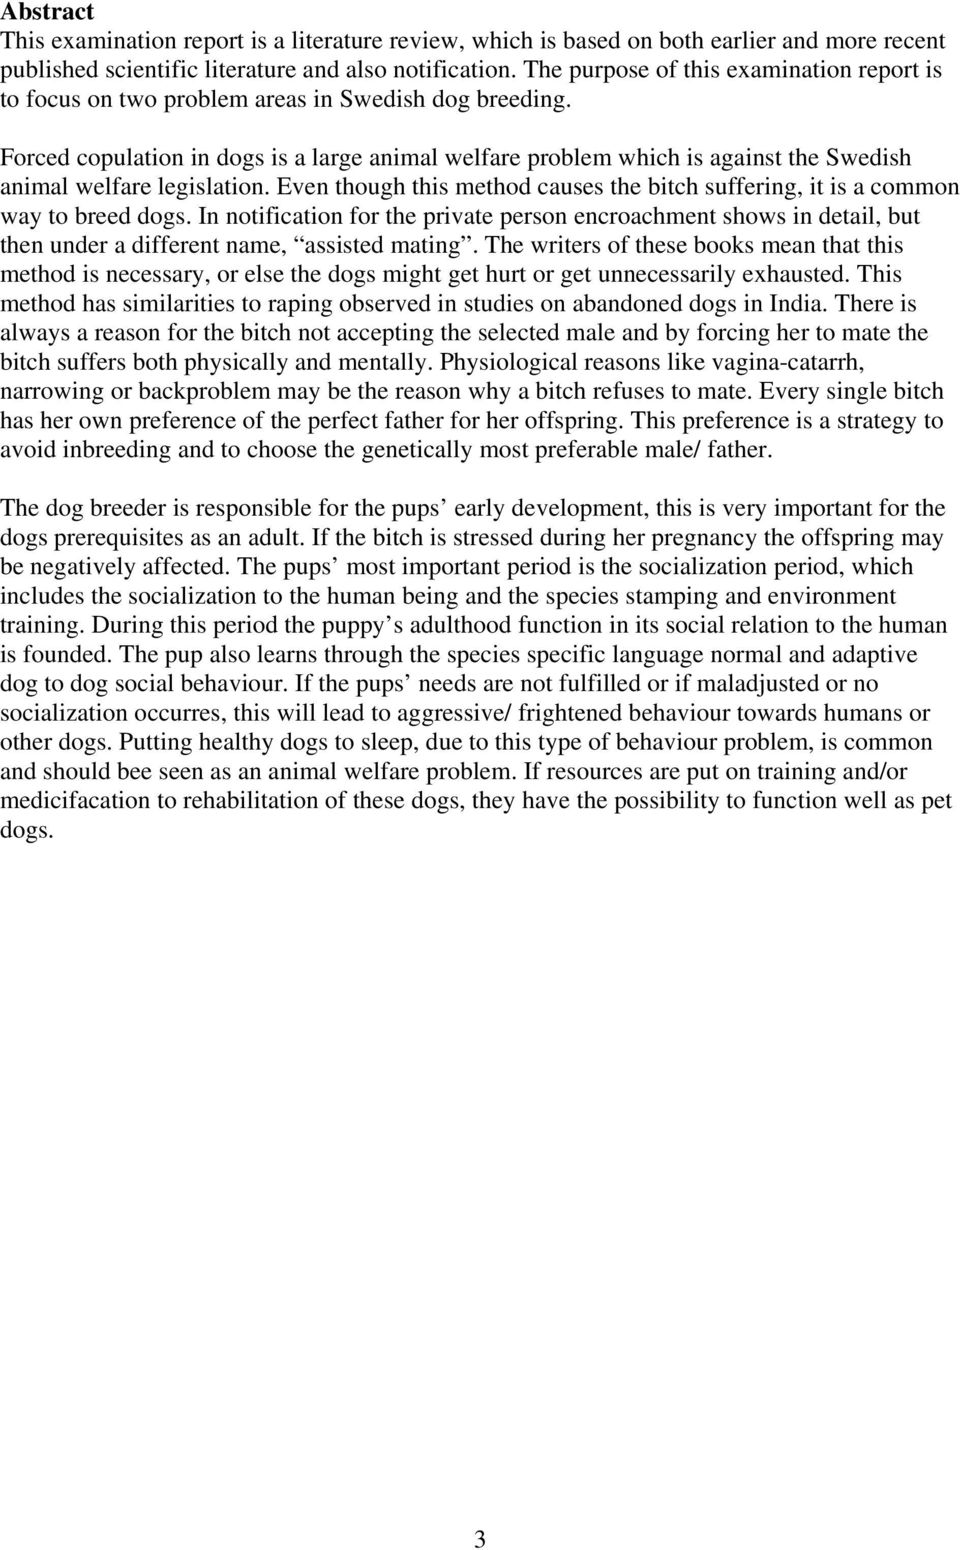 Forced copulation in dogs is a large animal welfare problem which is against the Swedish animal welfare legislation.